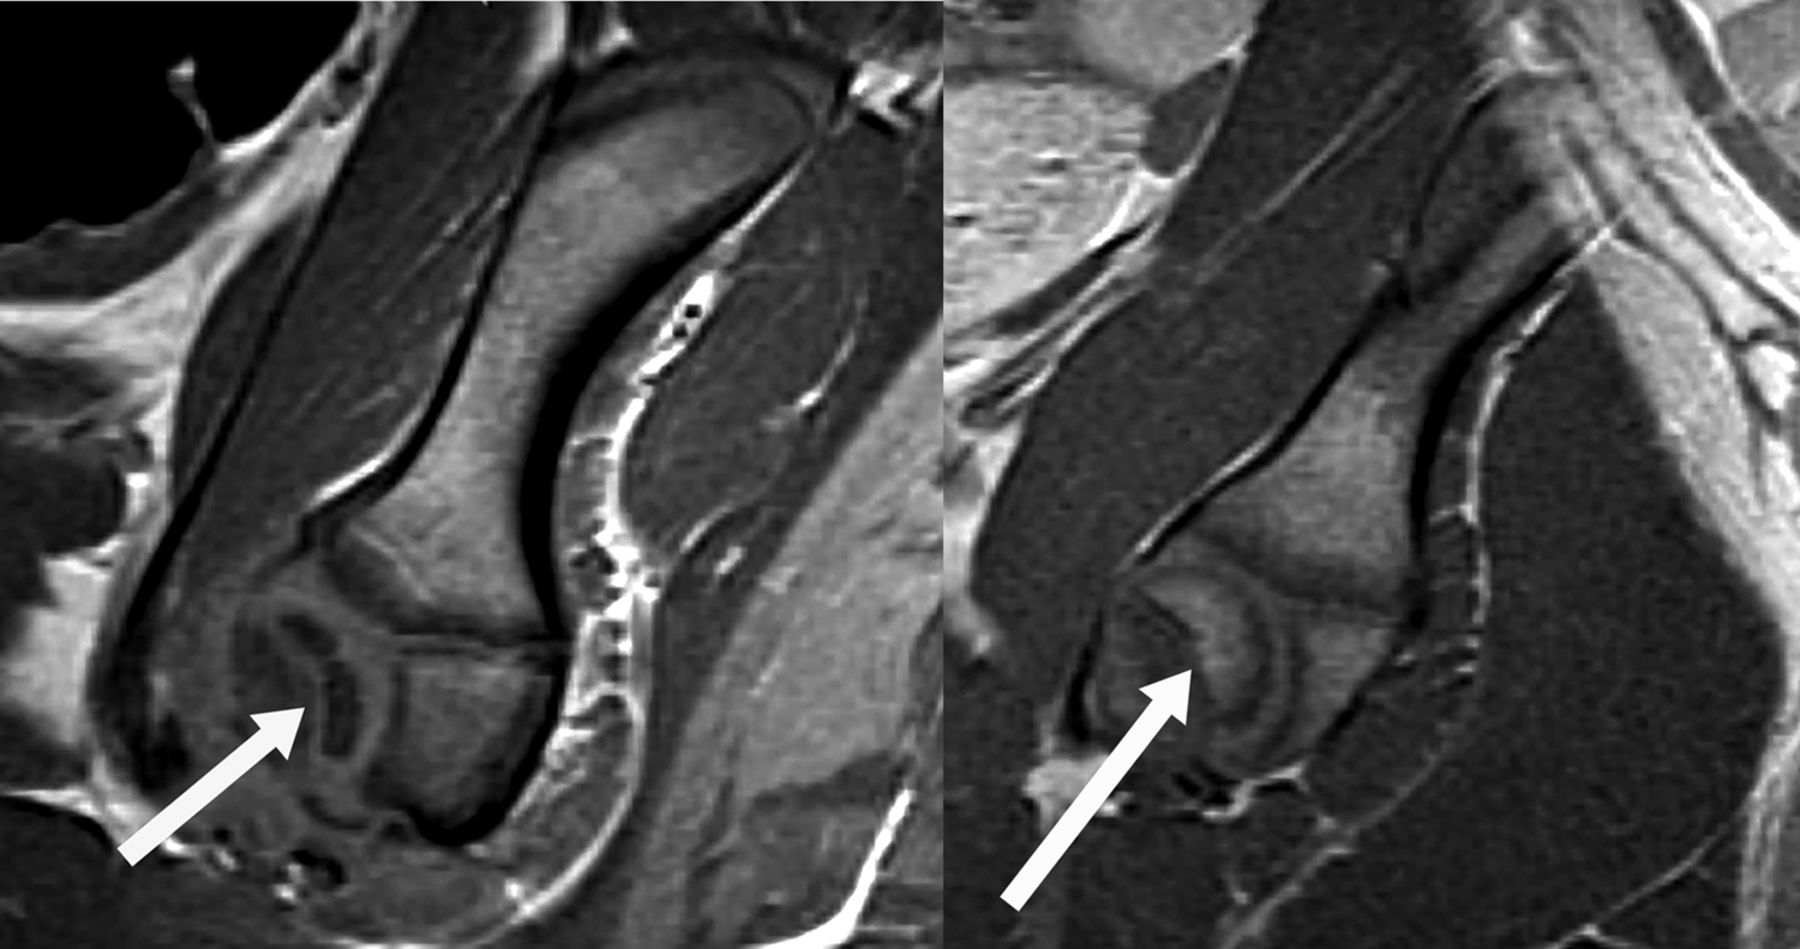 Fig. 4 
          MRI (left) from operated hip eight weeks
post-surgery shows irregularly shaped femoral head (white arrow)
and abnormal acetabulum with bony under-development anteriorly.
Tri-radiate cartilage is abnormal and widened in parts. The ilium
is shown above with iliac crest apophysis. MRI (right) from the
normal hip shows the sphericity of the femoral head (white arrow)
and adjacent acetabulum. Tri-radiate cartilage and ilium are normal.
        